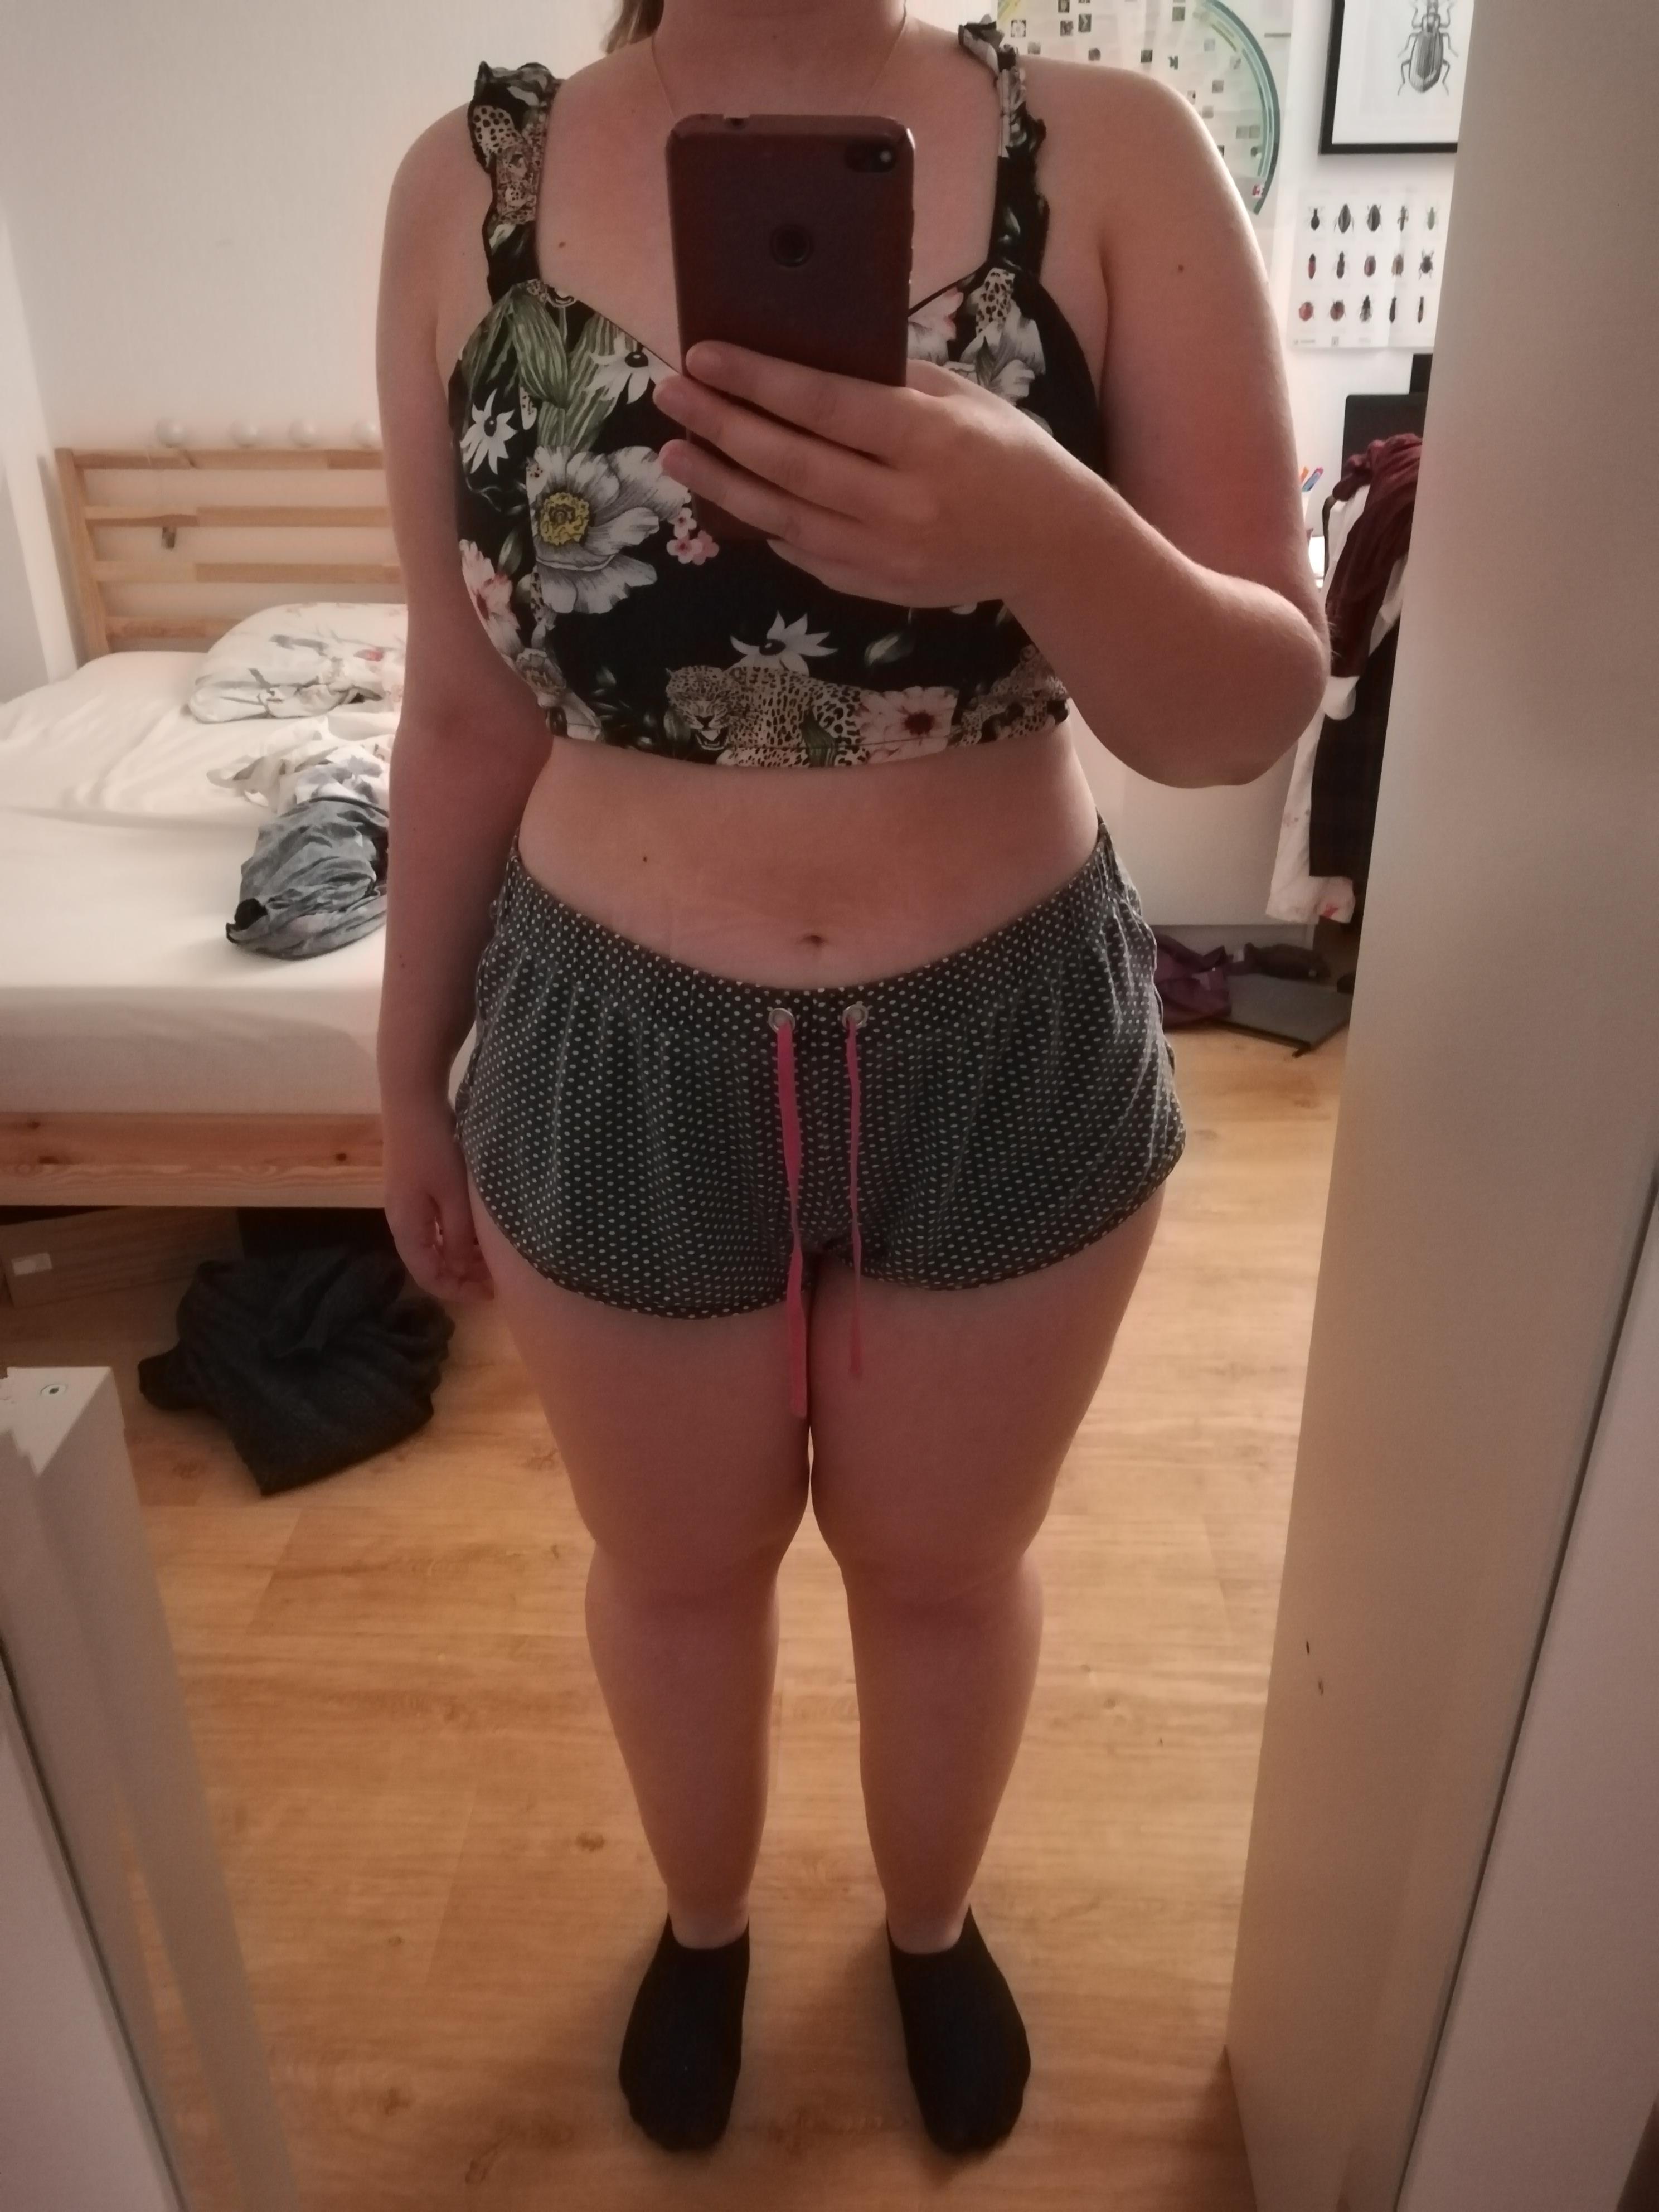 53kg in lbs